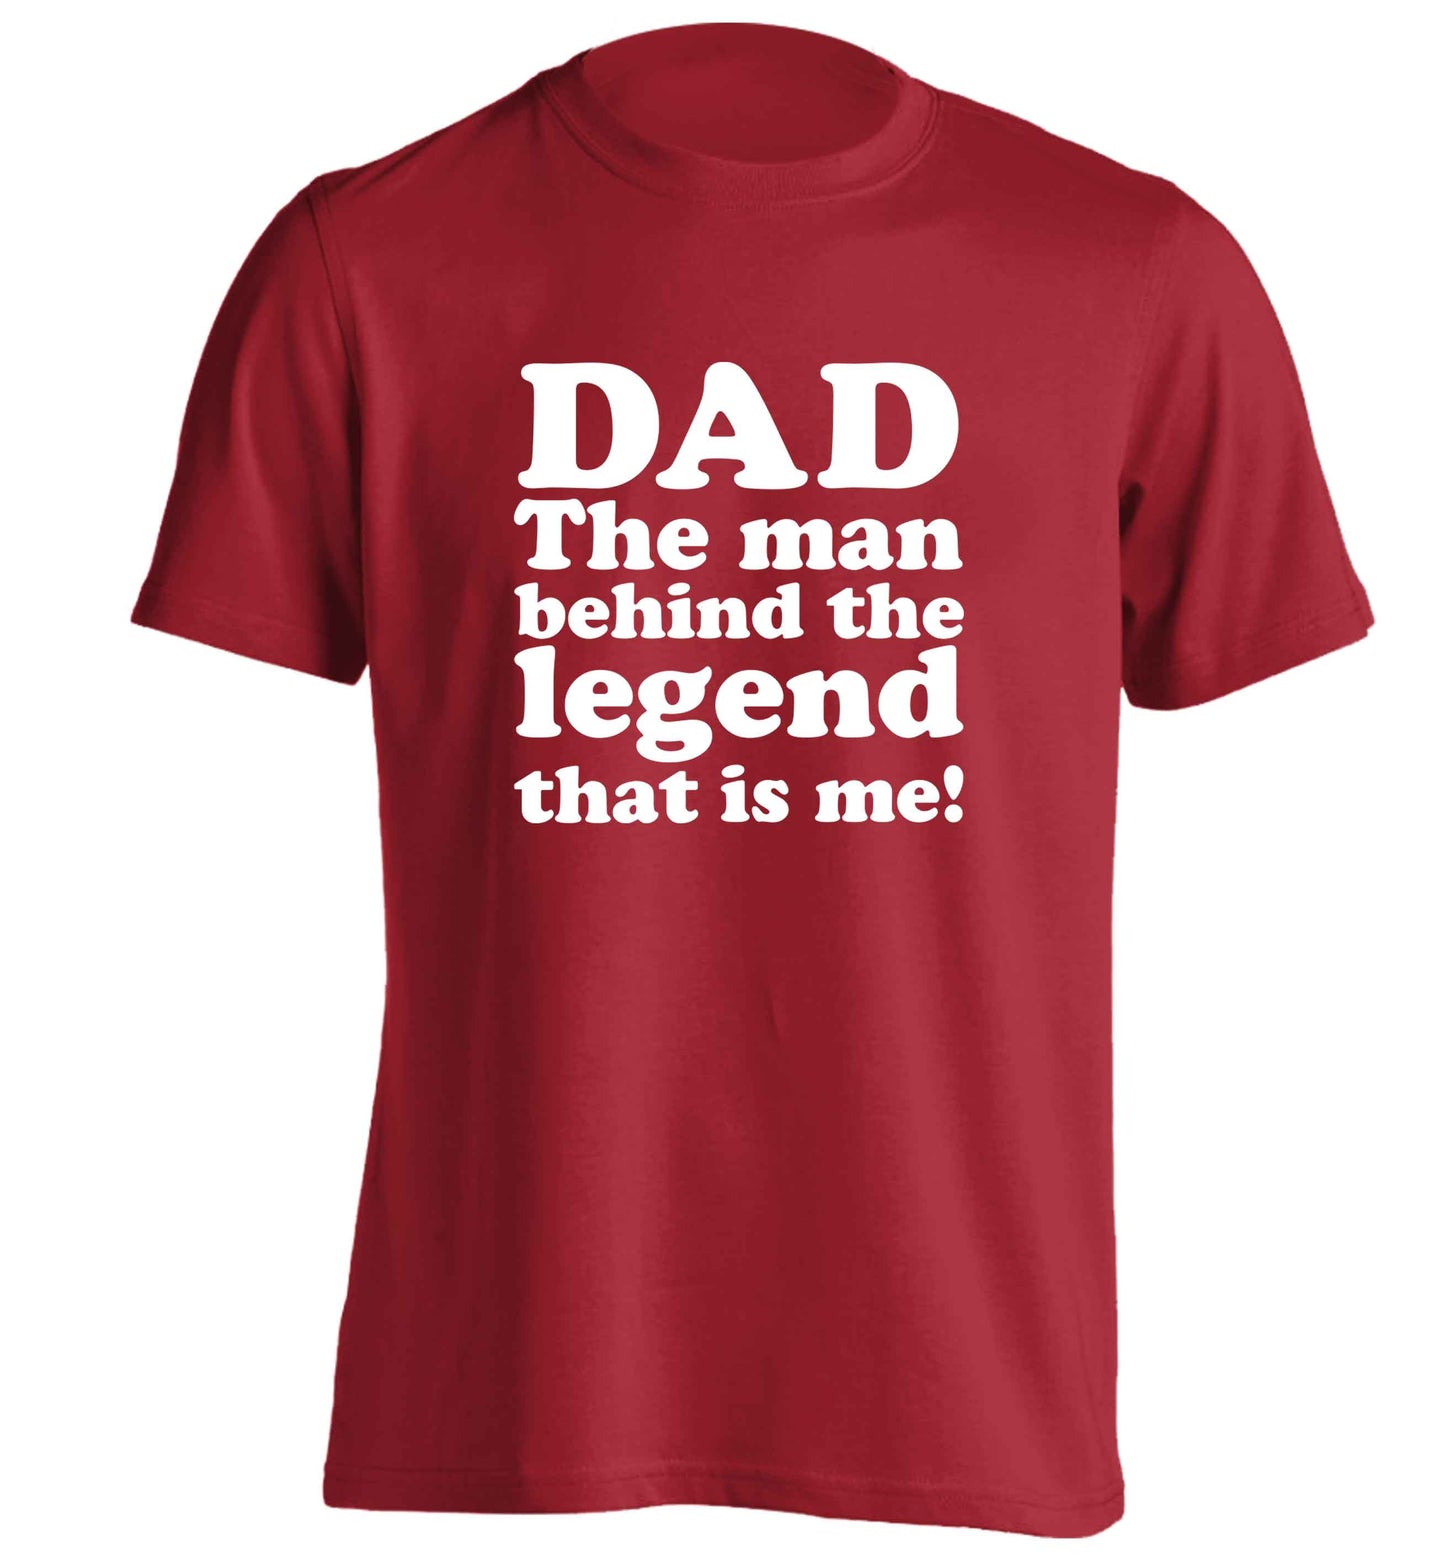 Dad the man behind the legend that is me adults unisex red Tshirt 2XL